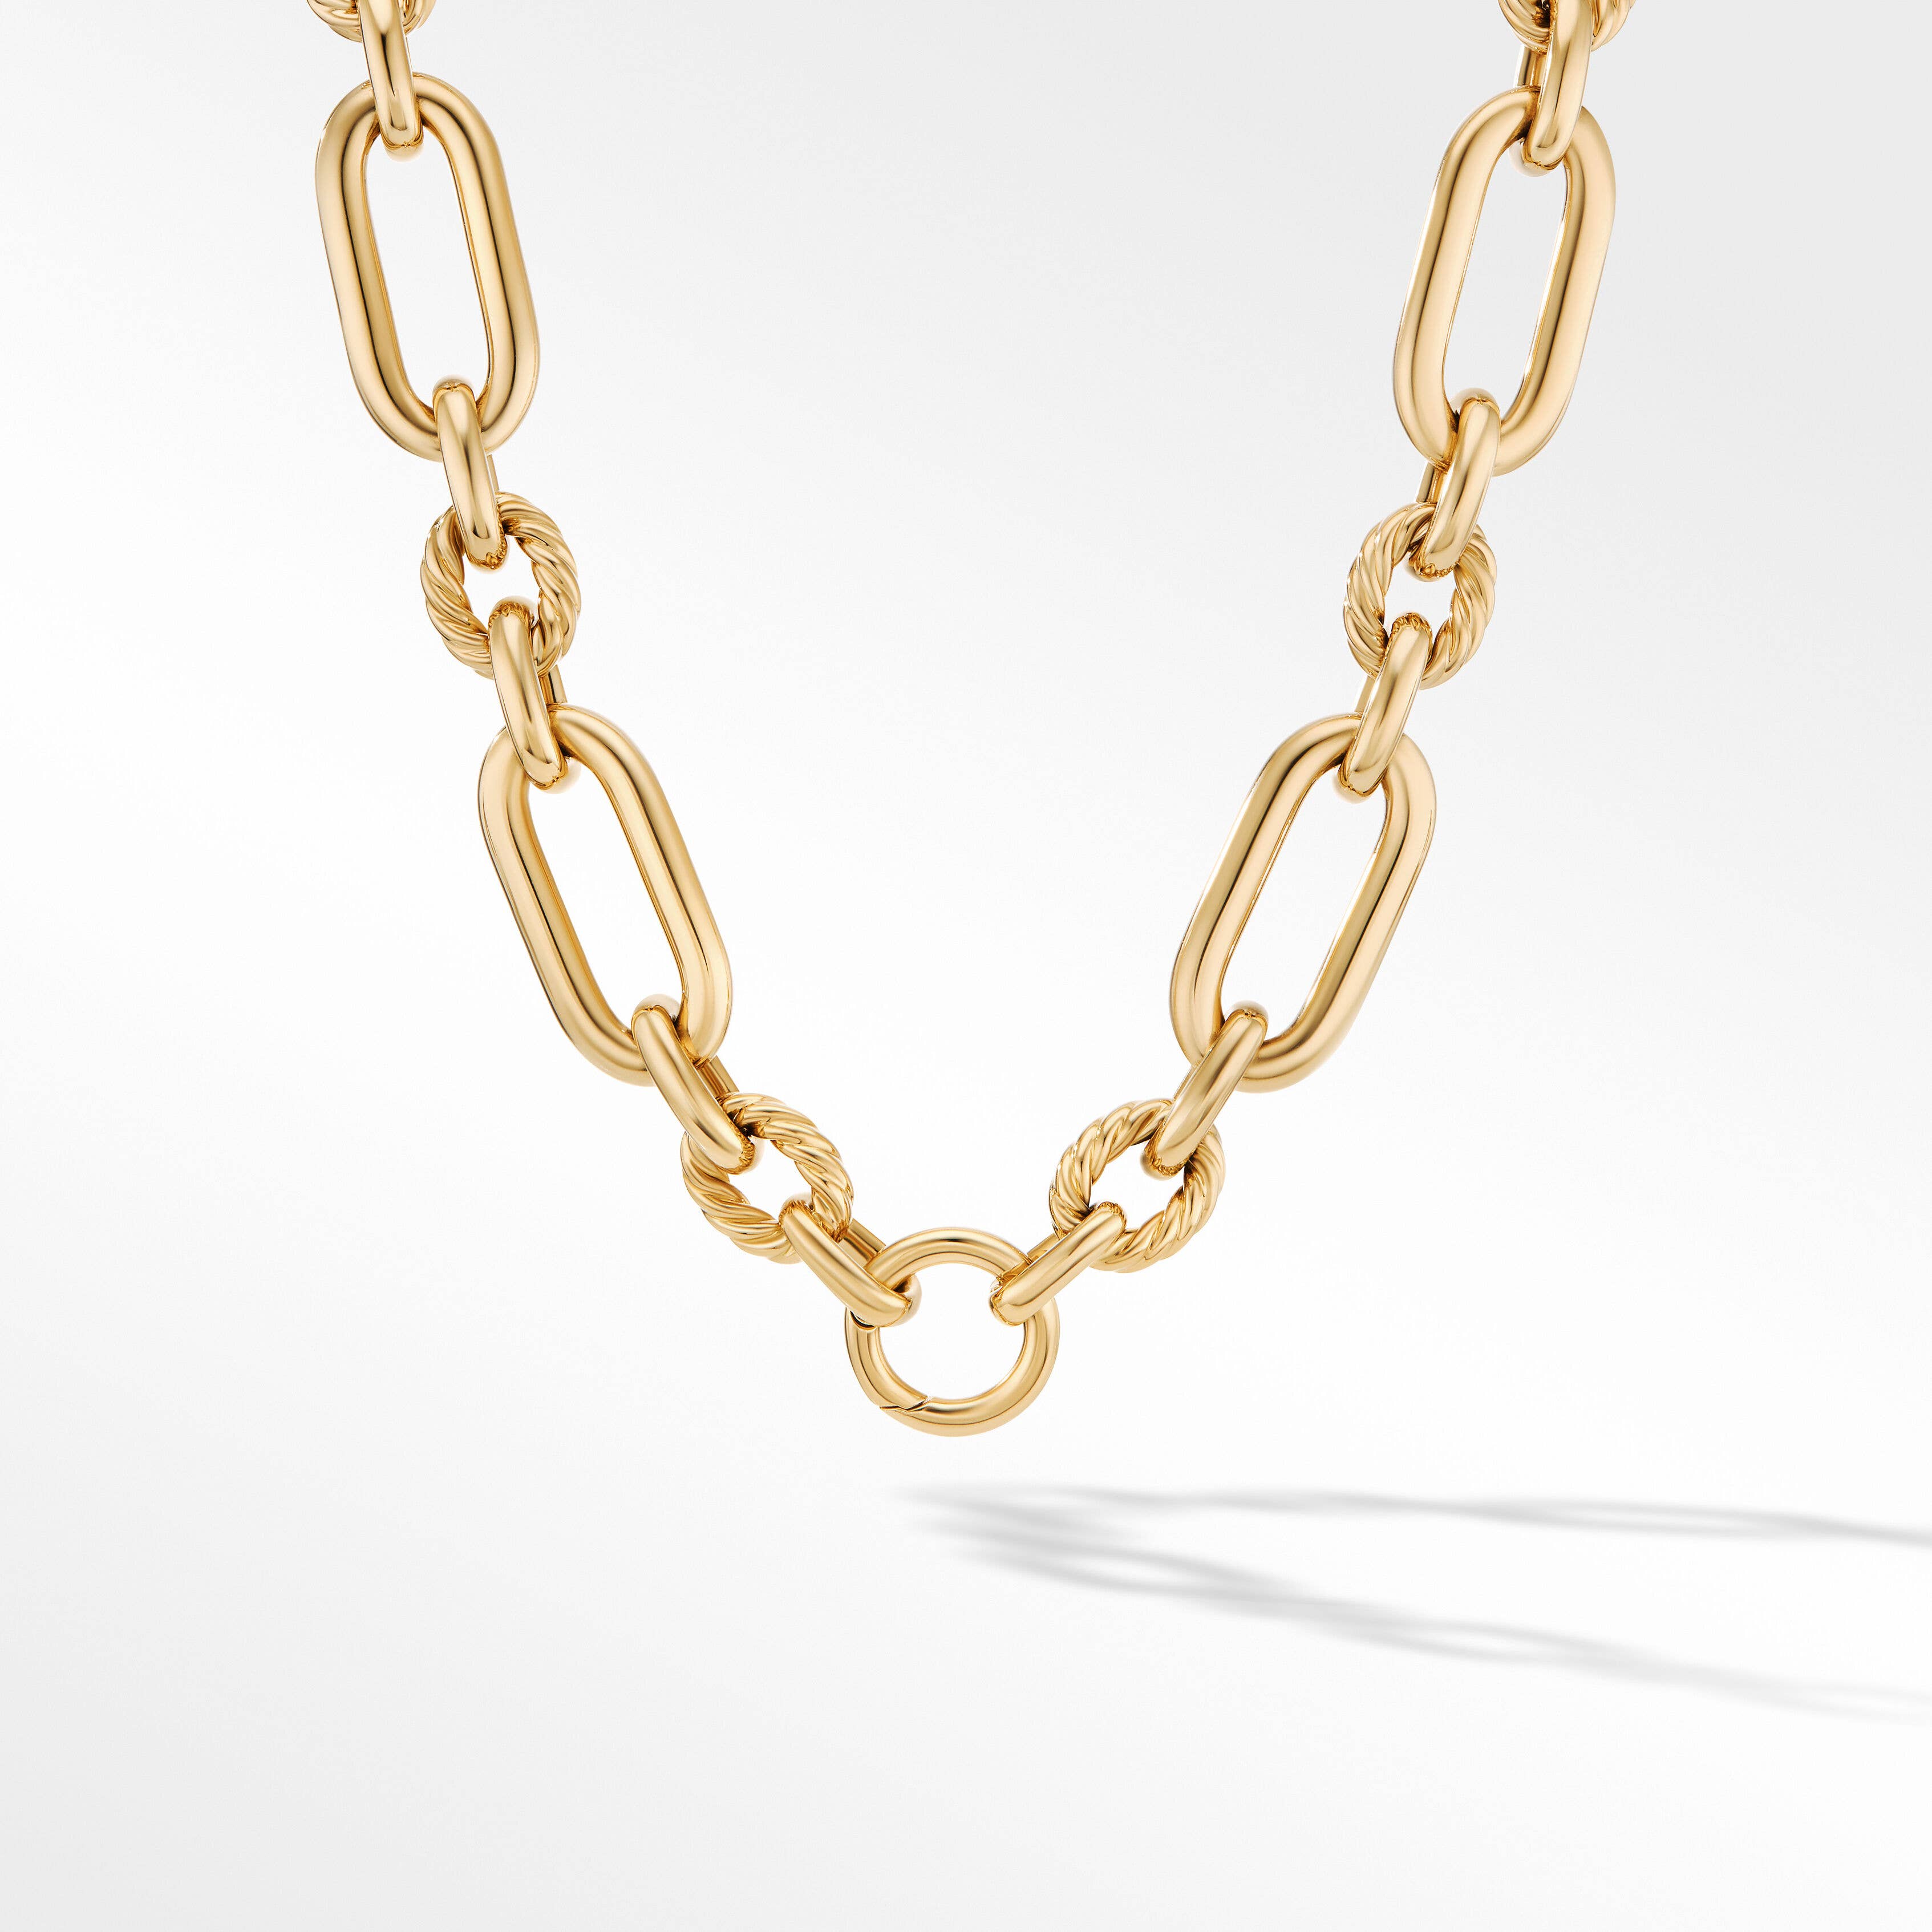 Lexington Chain Necklace in 18K Yellow Gold